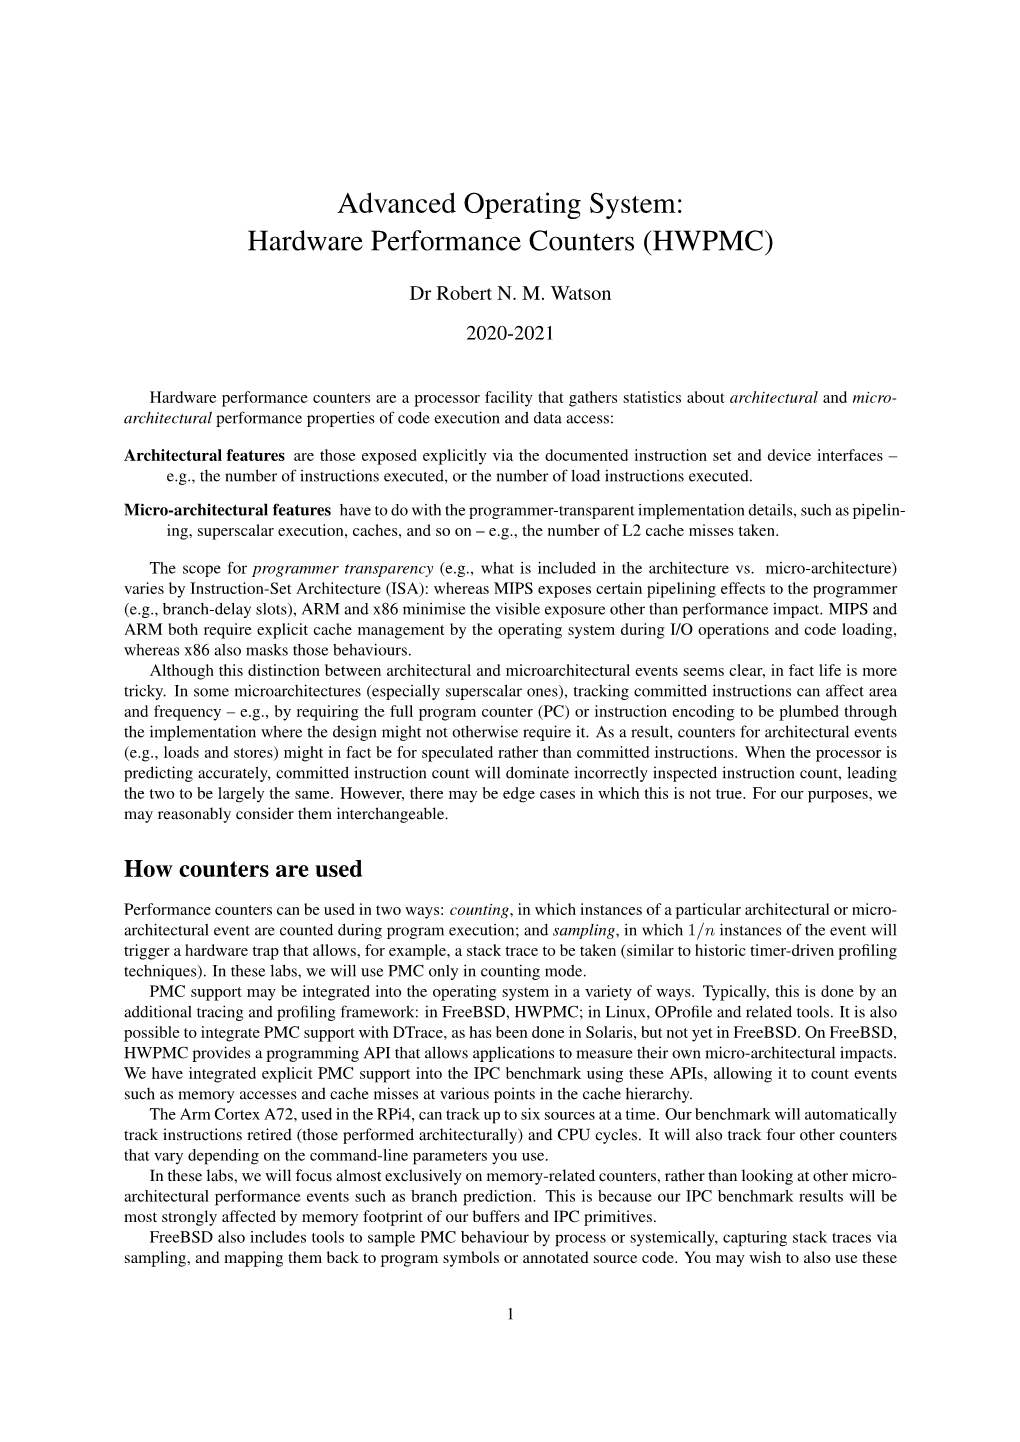 Hardware Performance Counters (HWPMC)